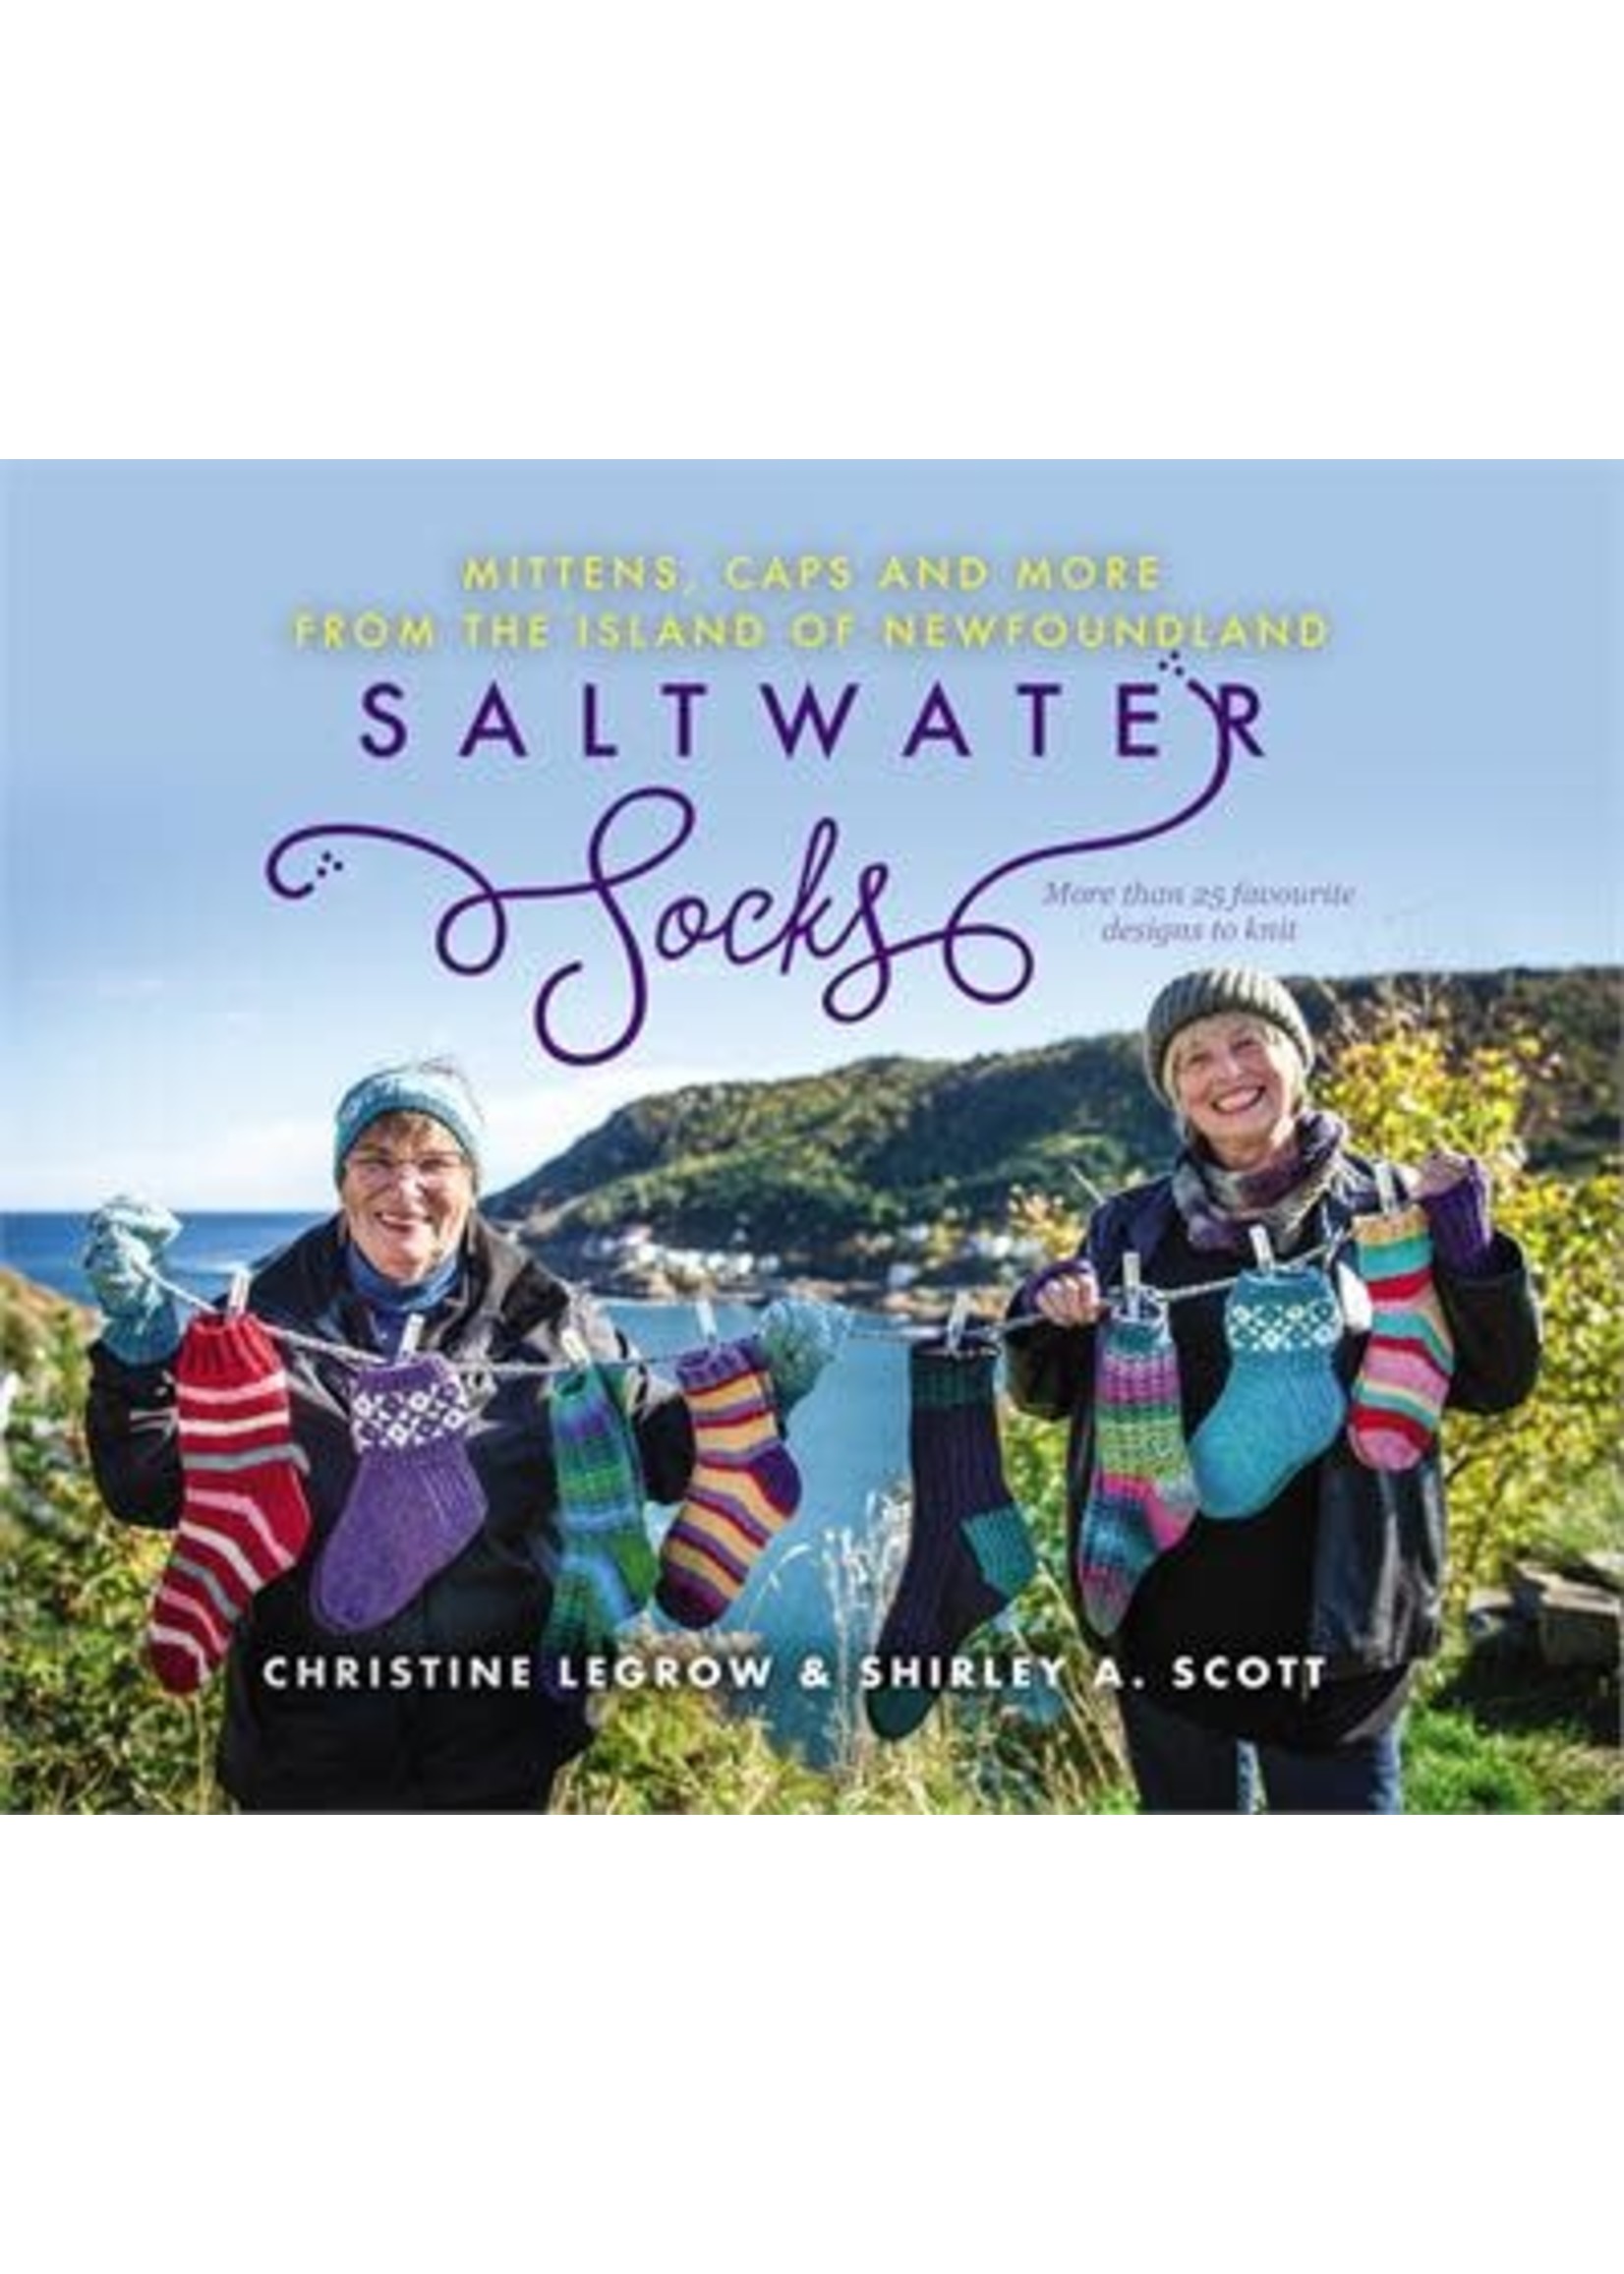 Saltwater Socks from the Island of Newfoundland: 25+ mittens, caps, and more to knit by Christine LeGrow, Shirley Scott